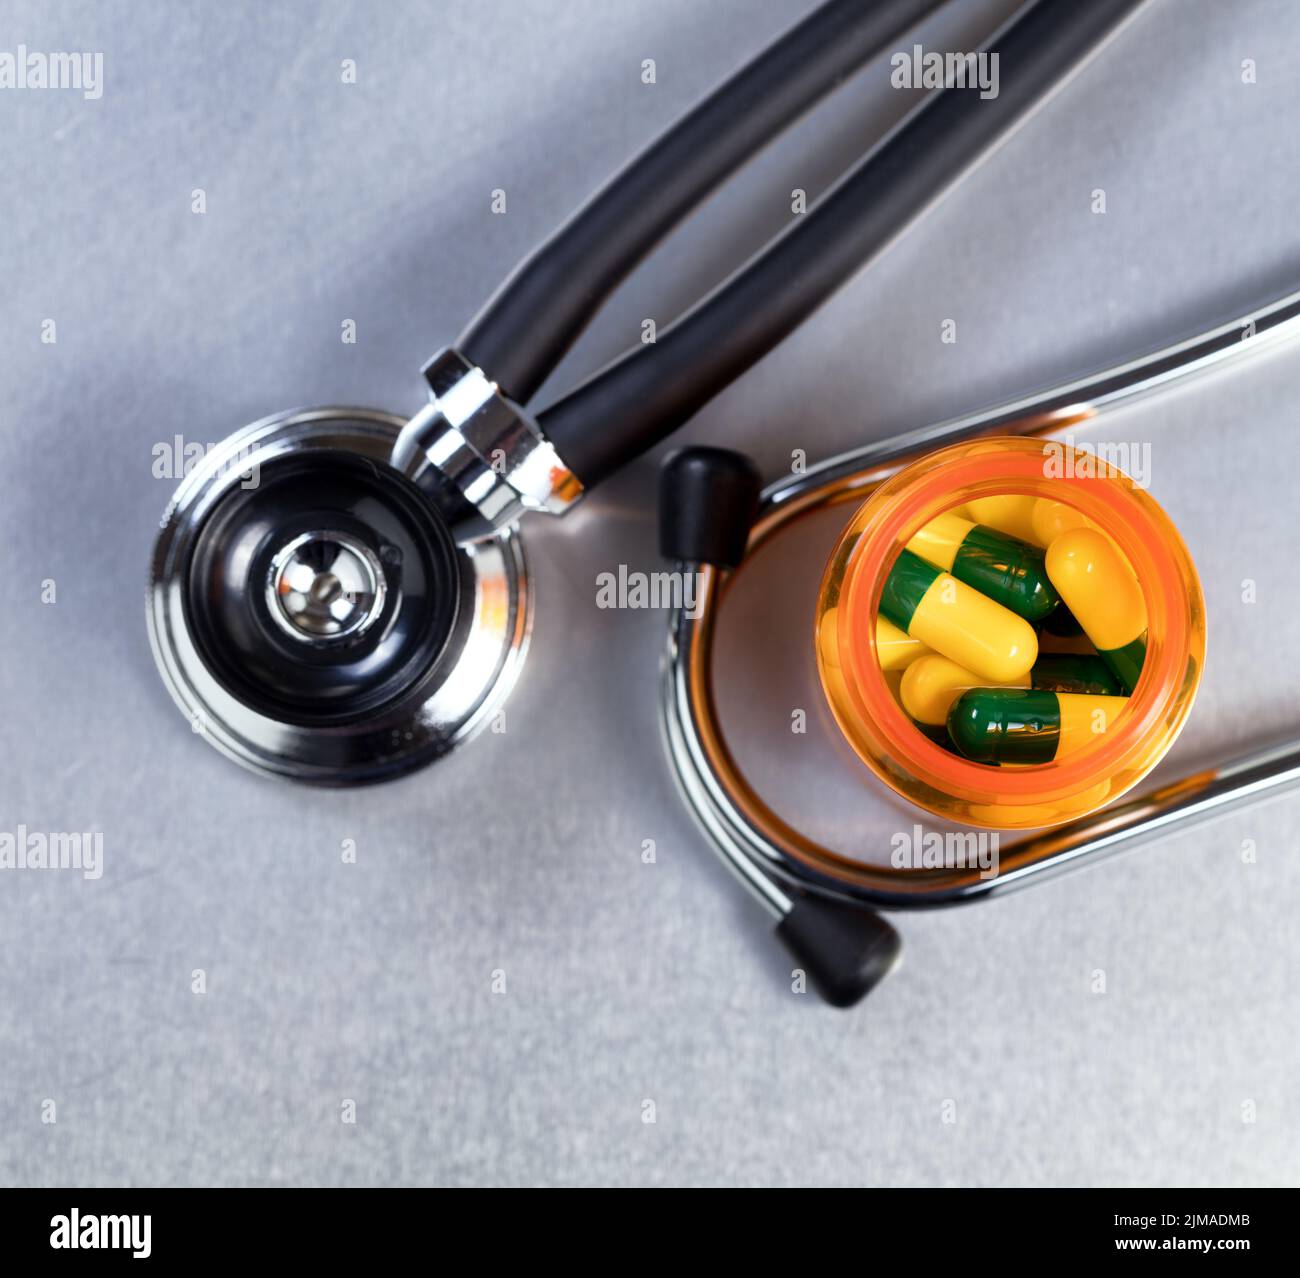 Medicine bottle filled with capsules on stainless steel table with stethoscope Stock Photo